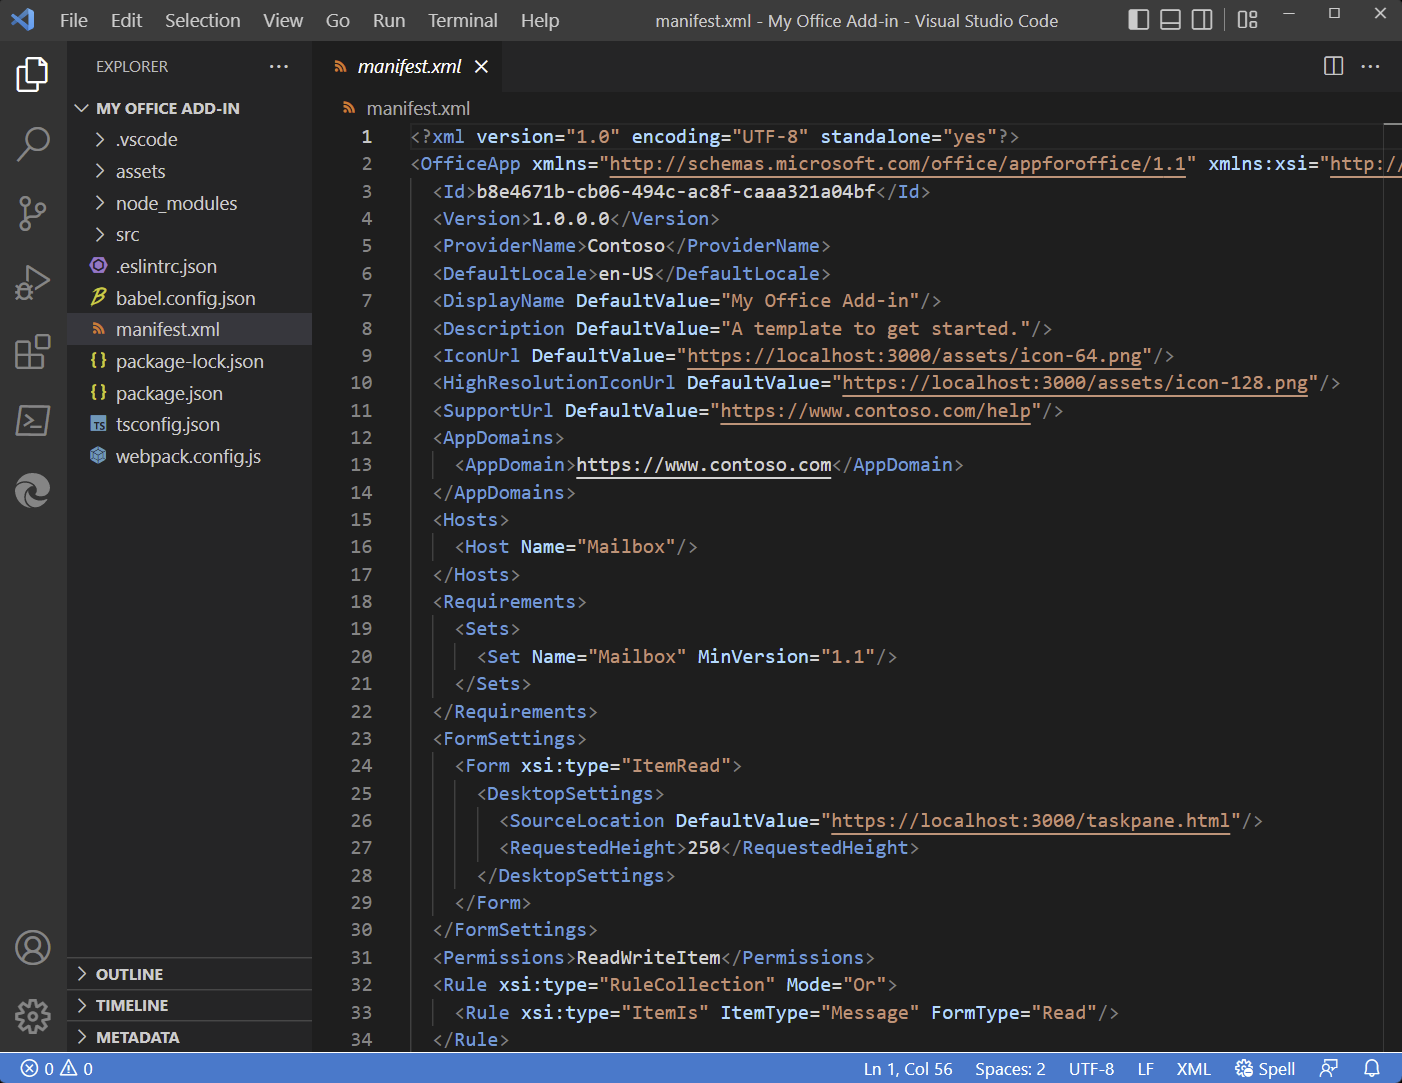 The manifest.xml file of an Office Add-ins project in Visual Studio Code